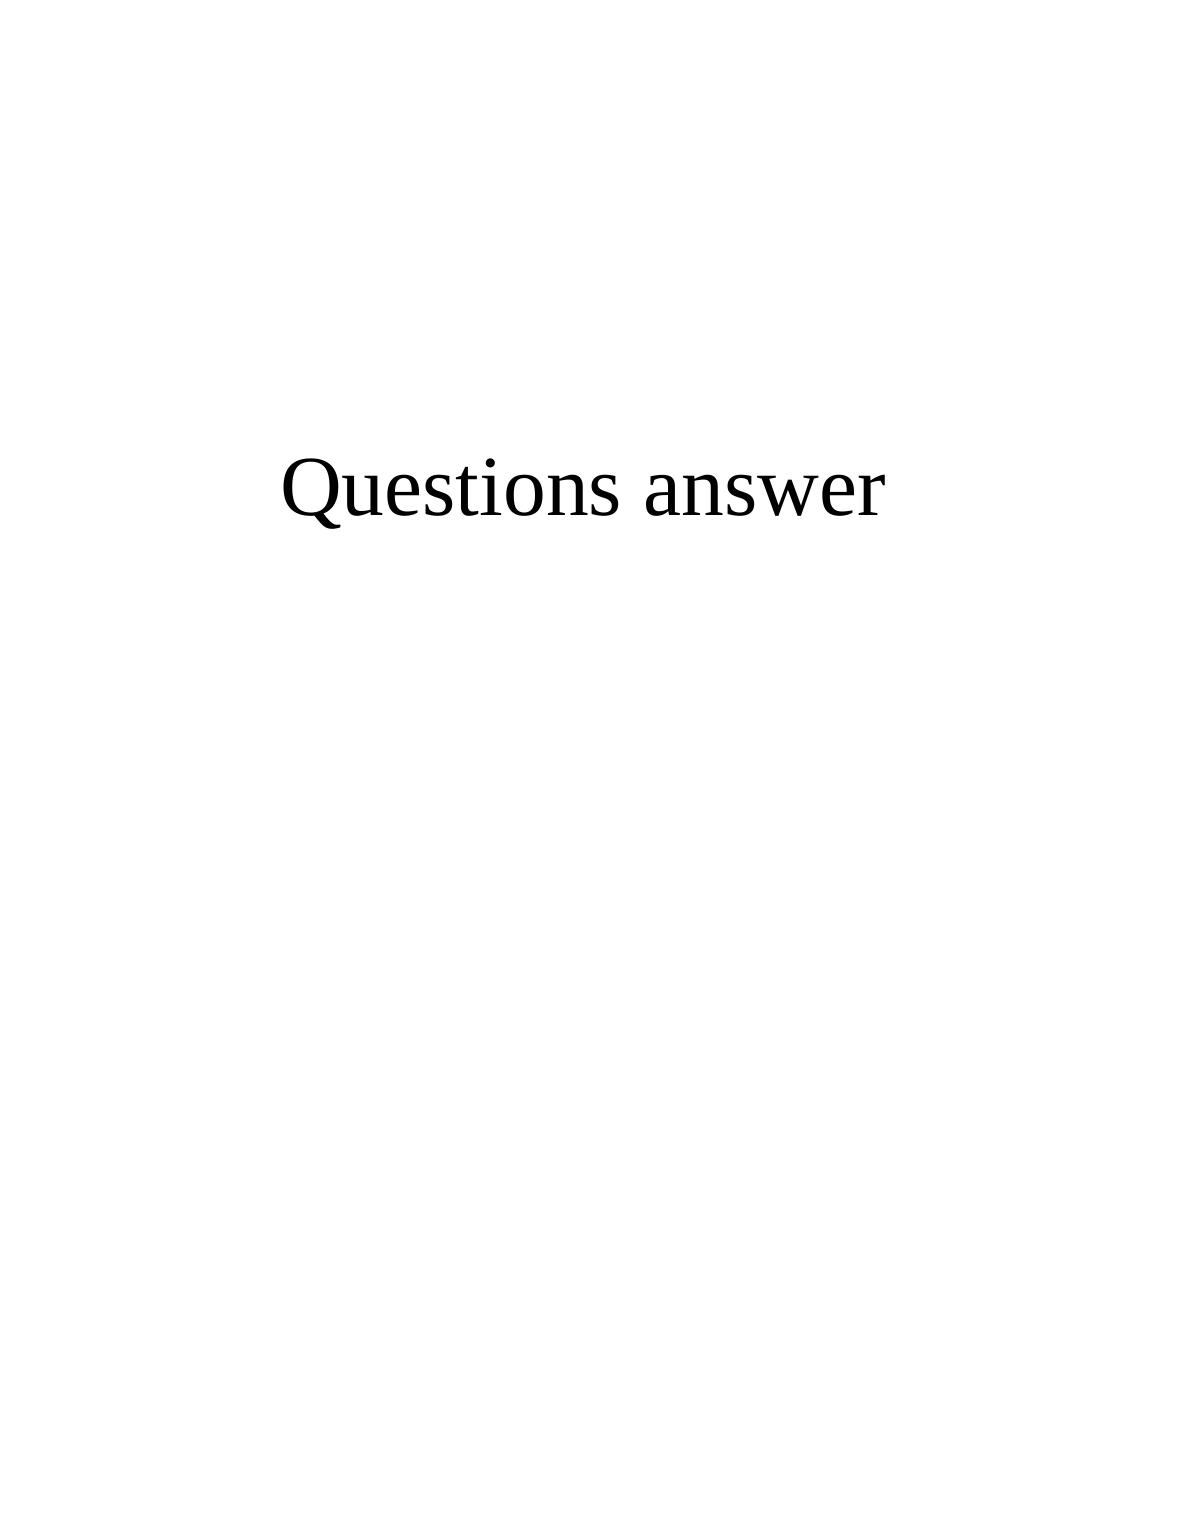 questions answer_1